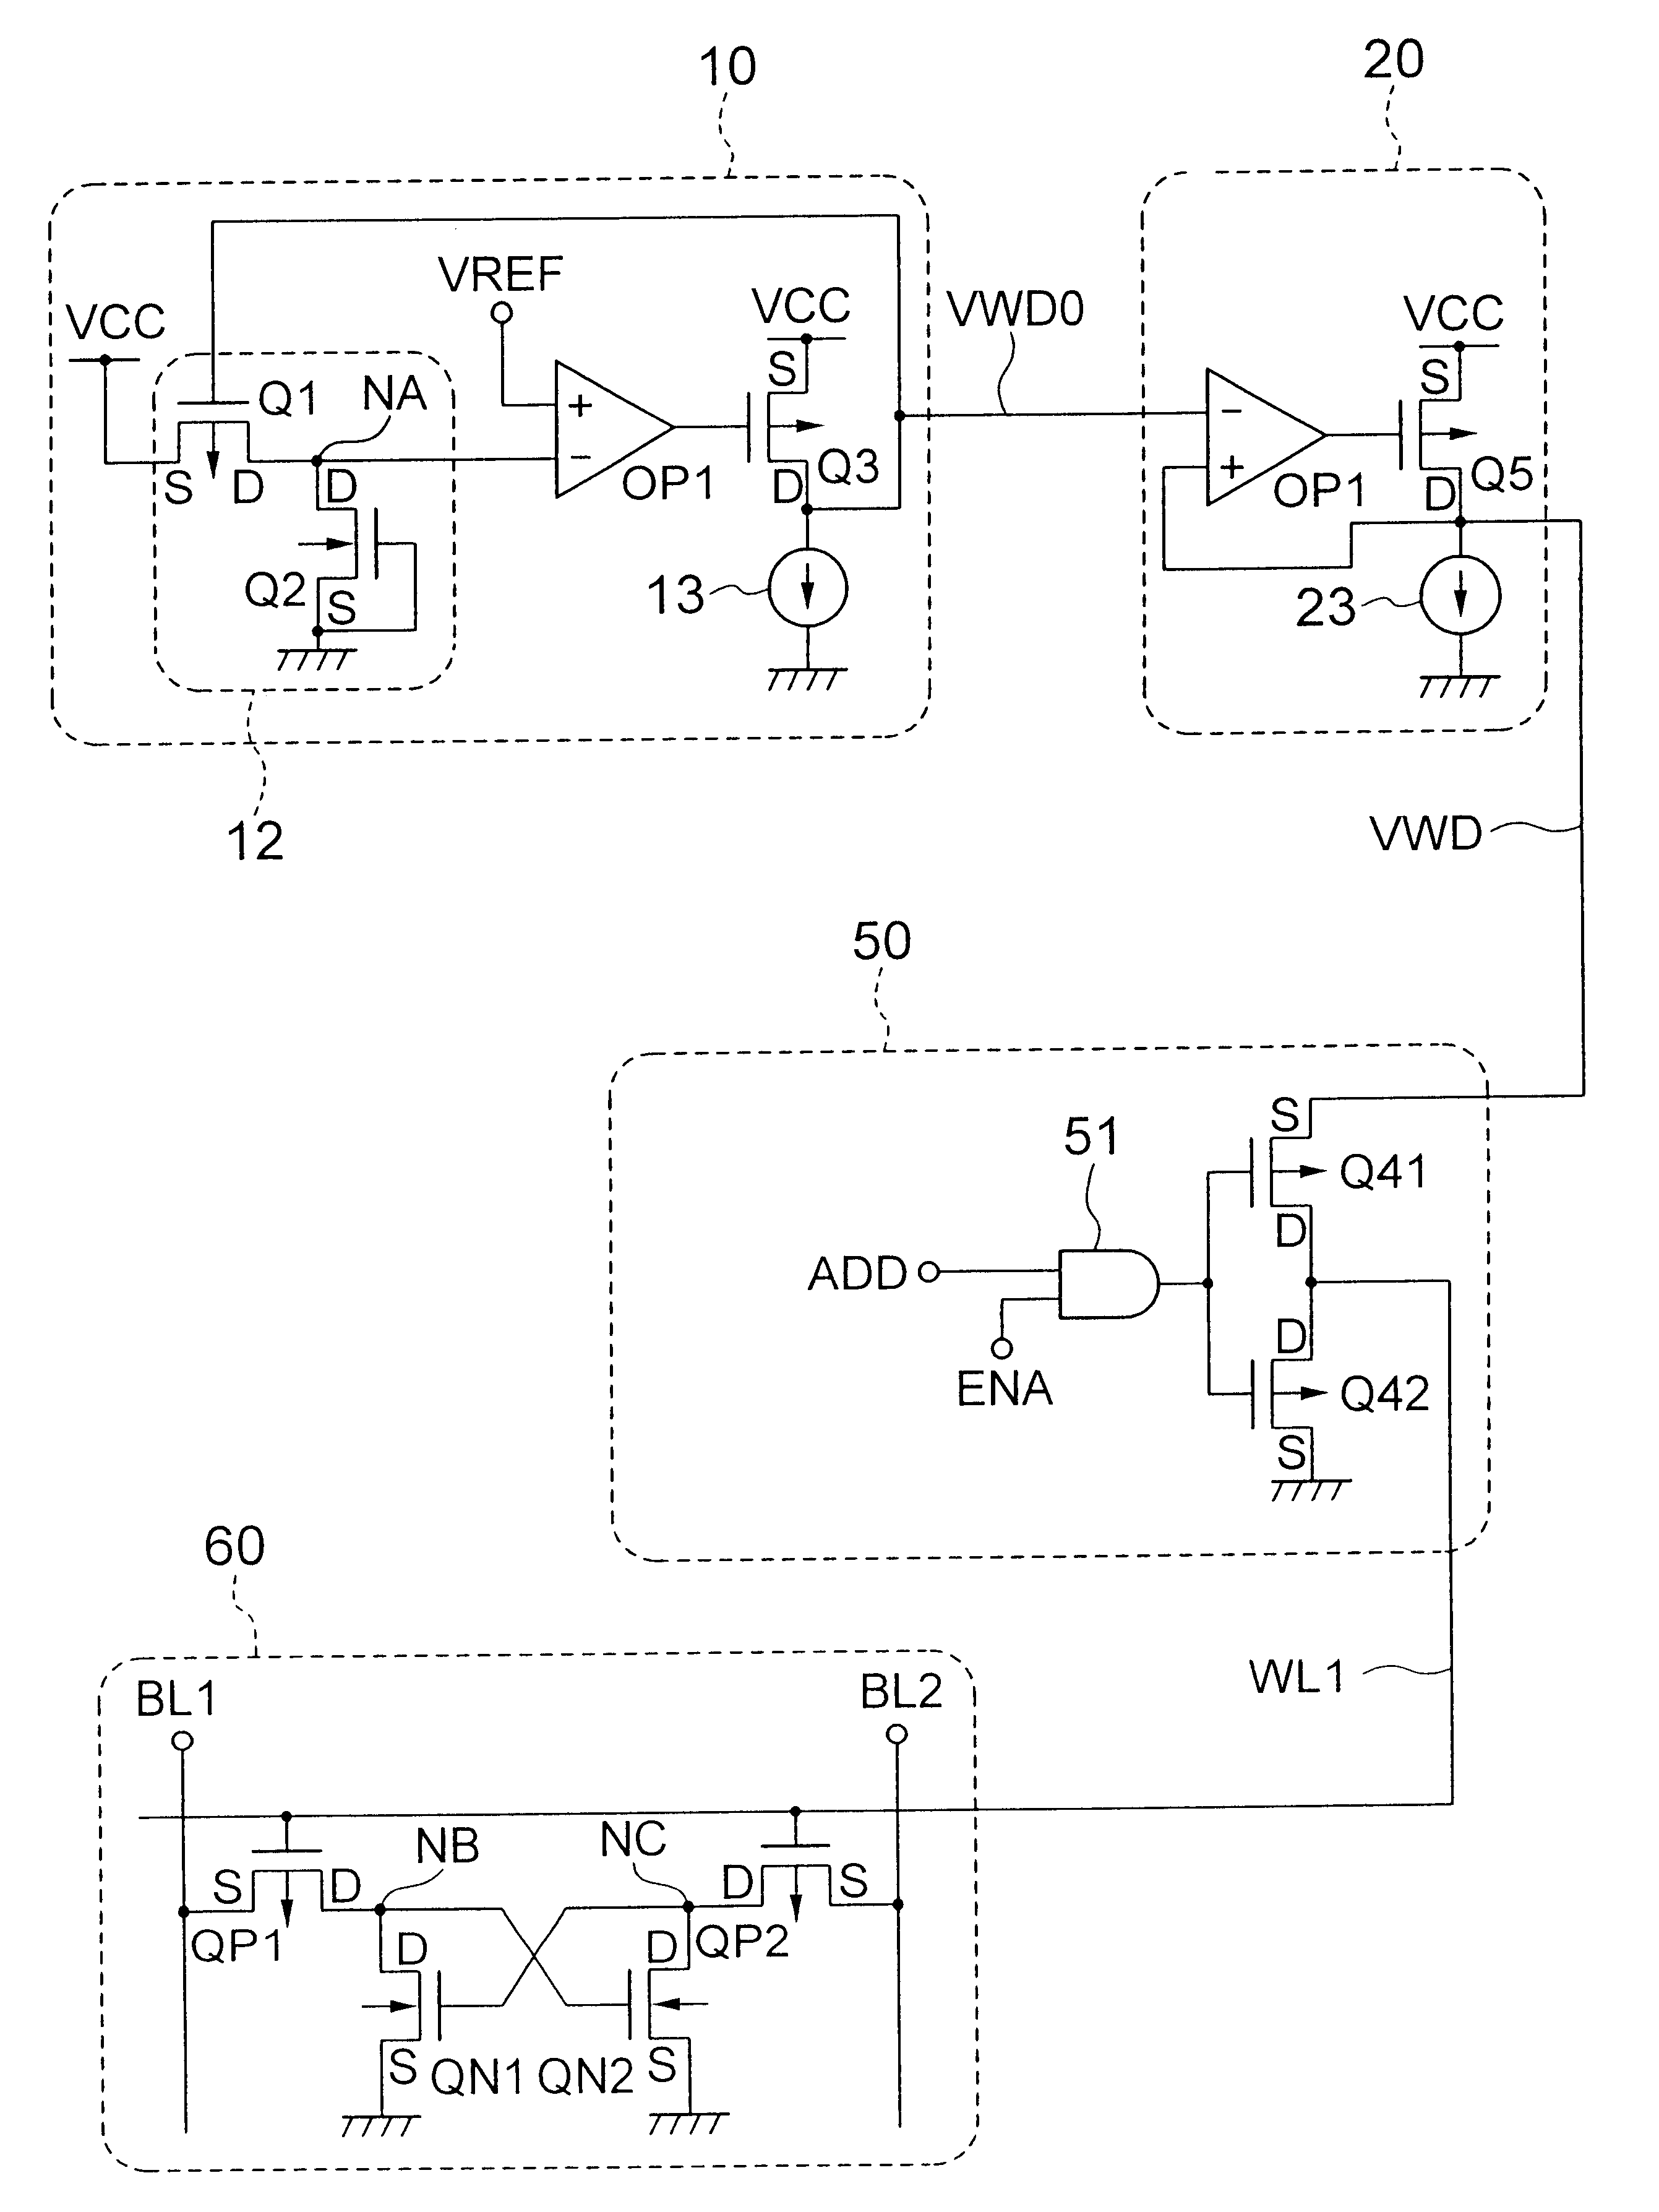 SRAM operating with a reduced power dissipation